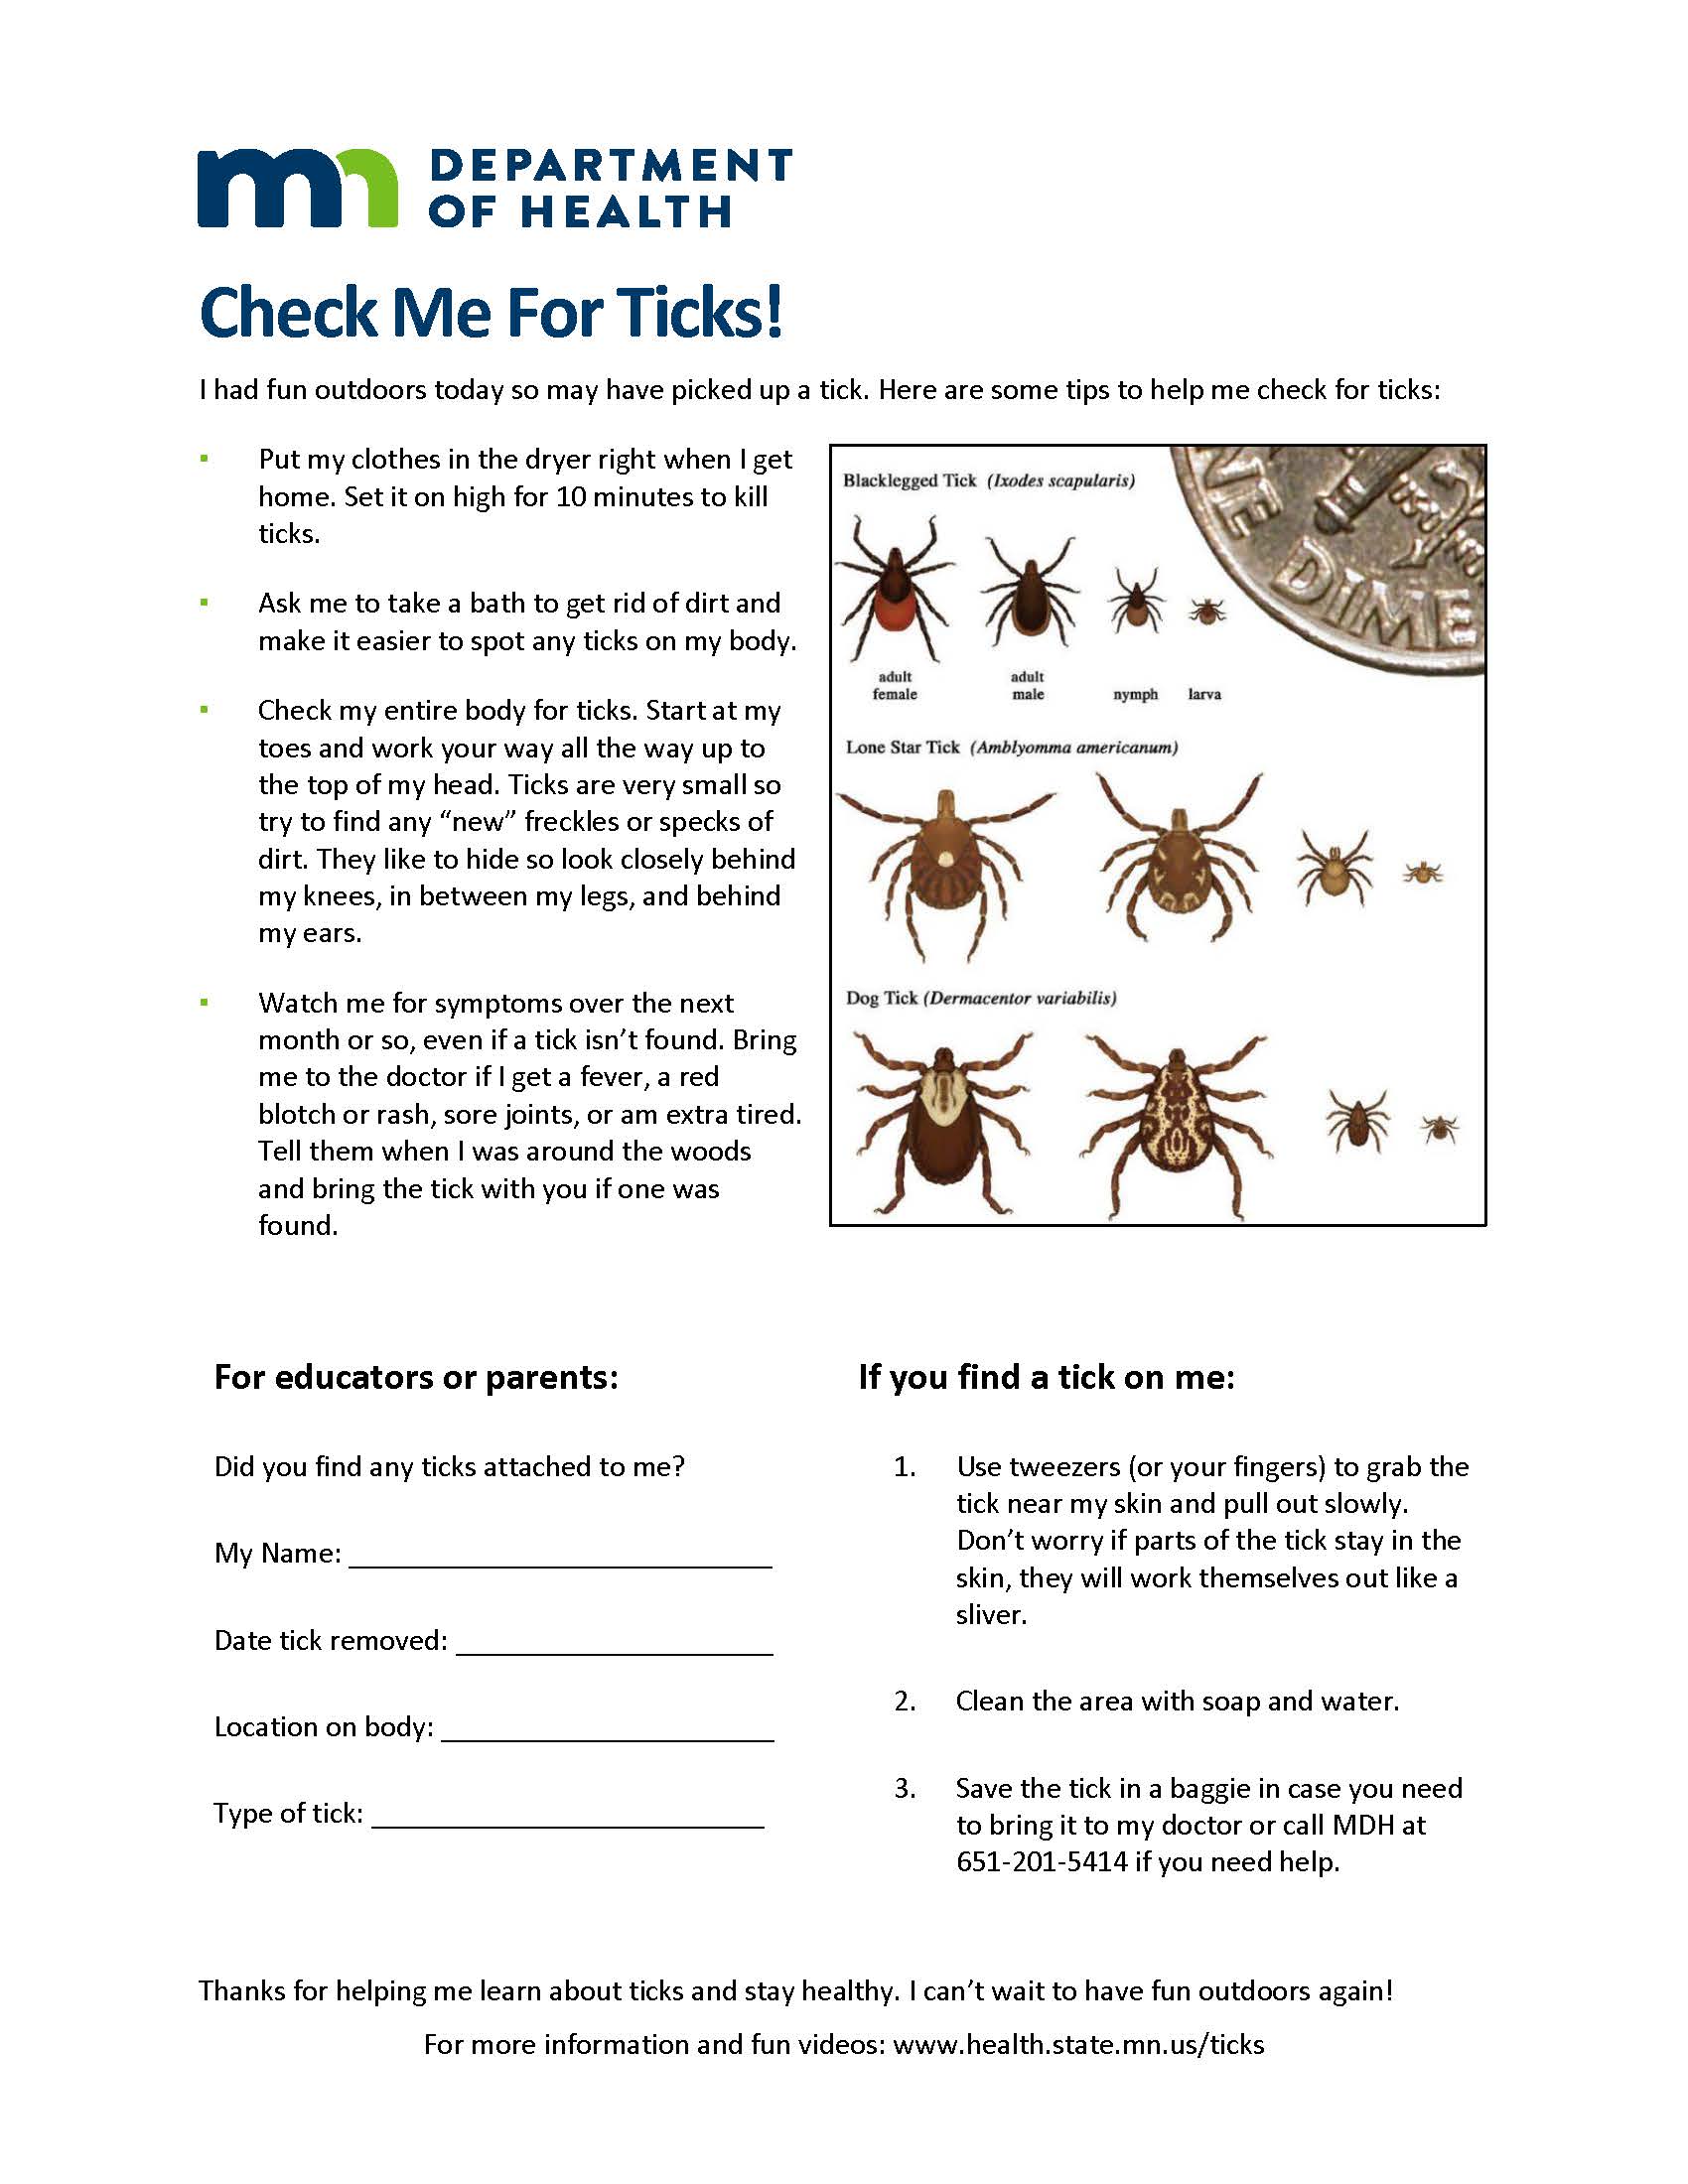 image of Check Me For Ticks! Form